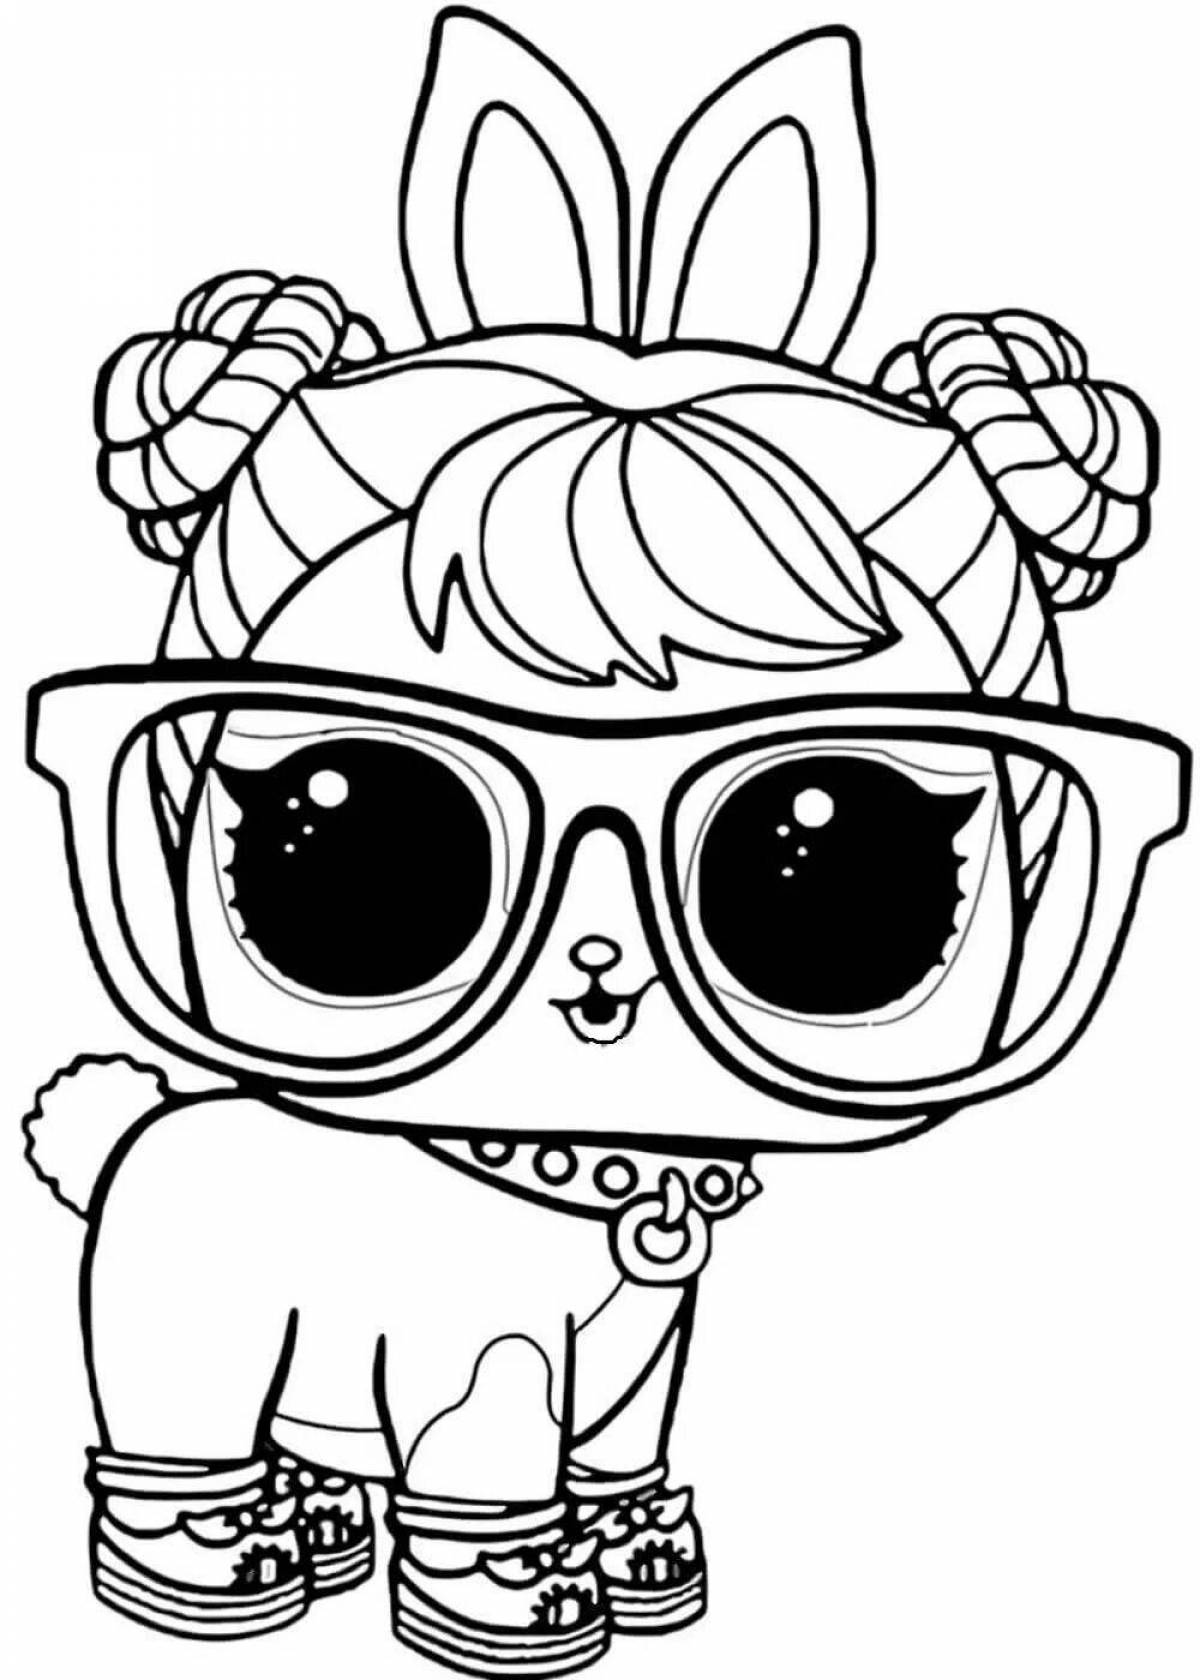 Lovely lol doll coloring book for kids